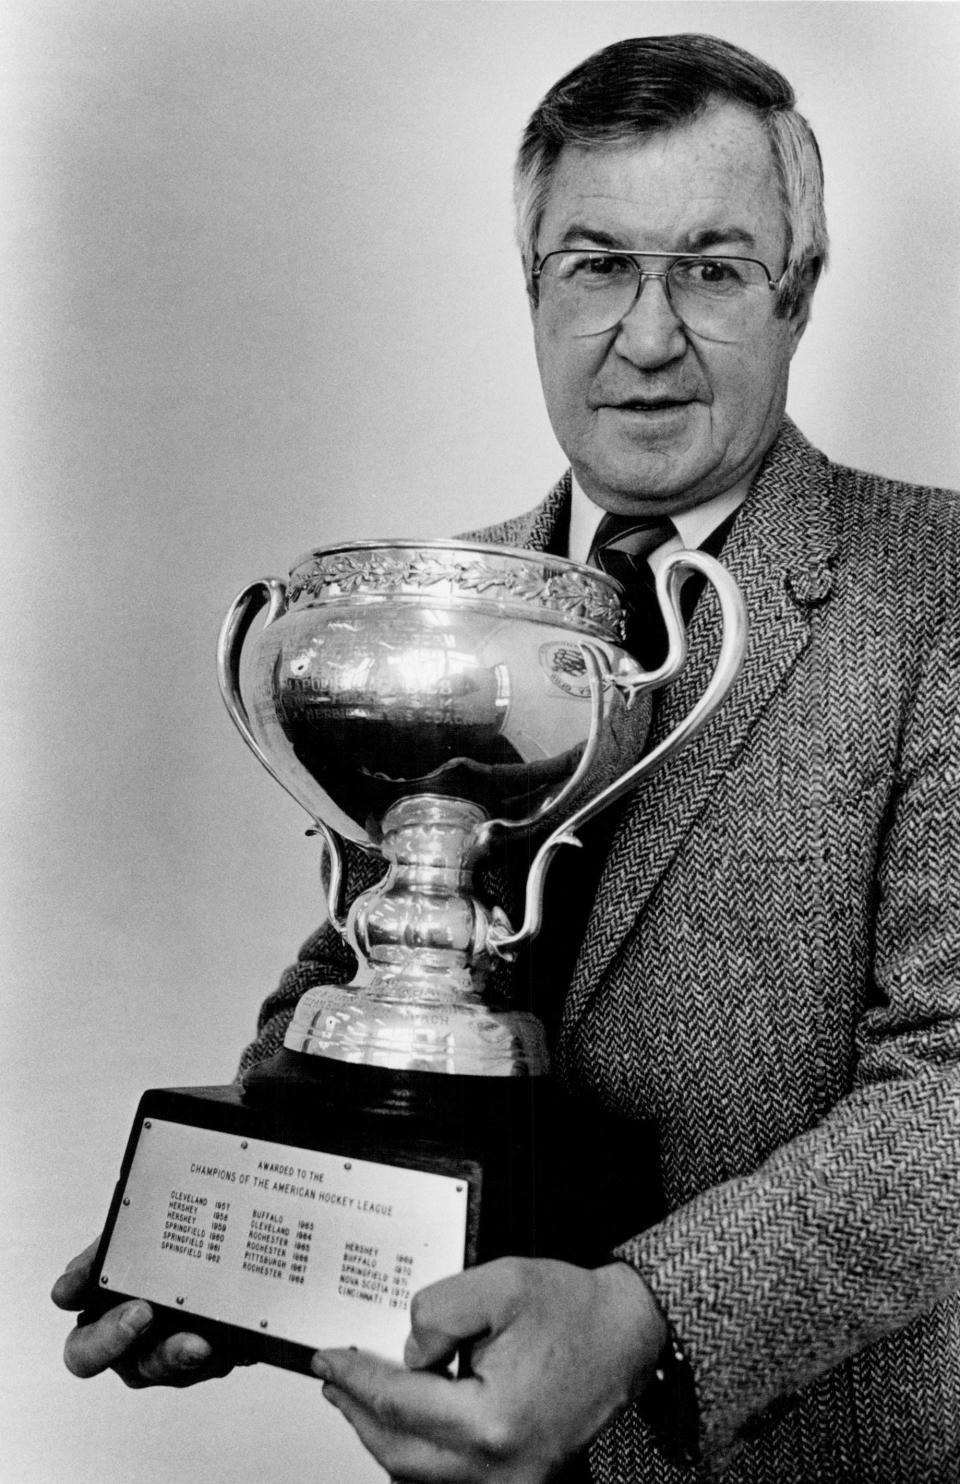 Joe Crozier holds the Calder Cup after returning to coach the Rochester Americans in October 1983. Crozier coached the Amerks to three Calder Cup titles in the 1960s.